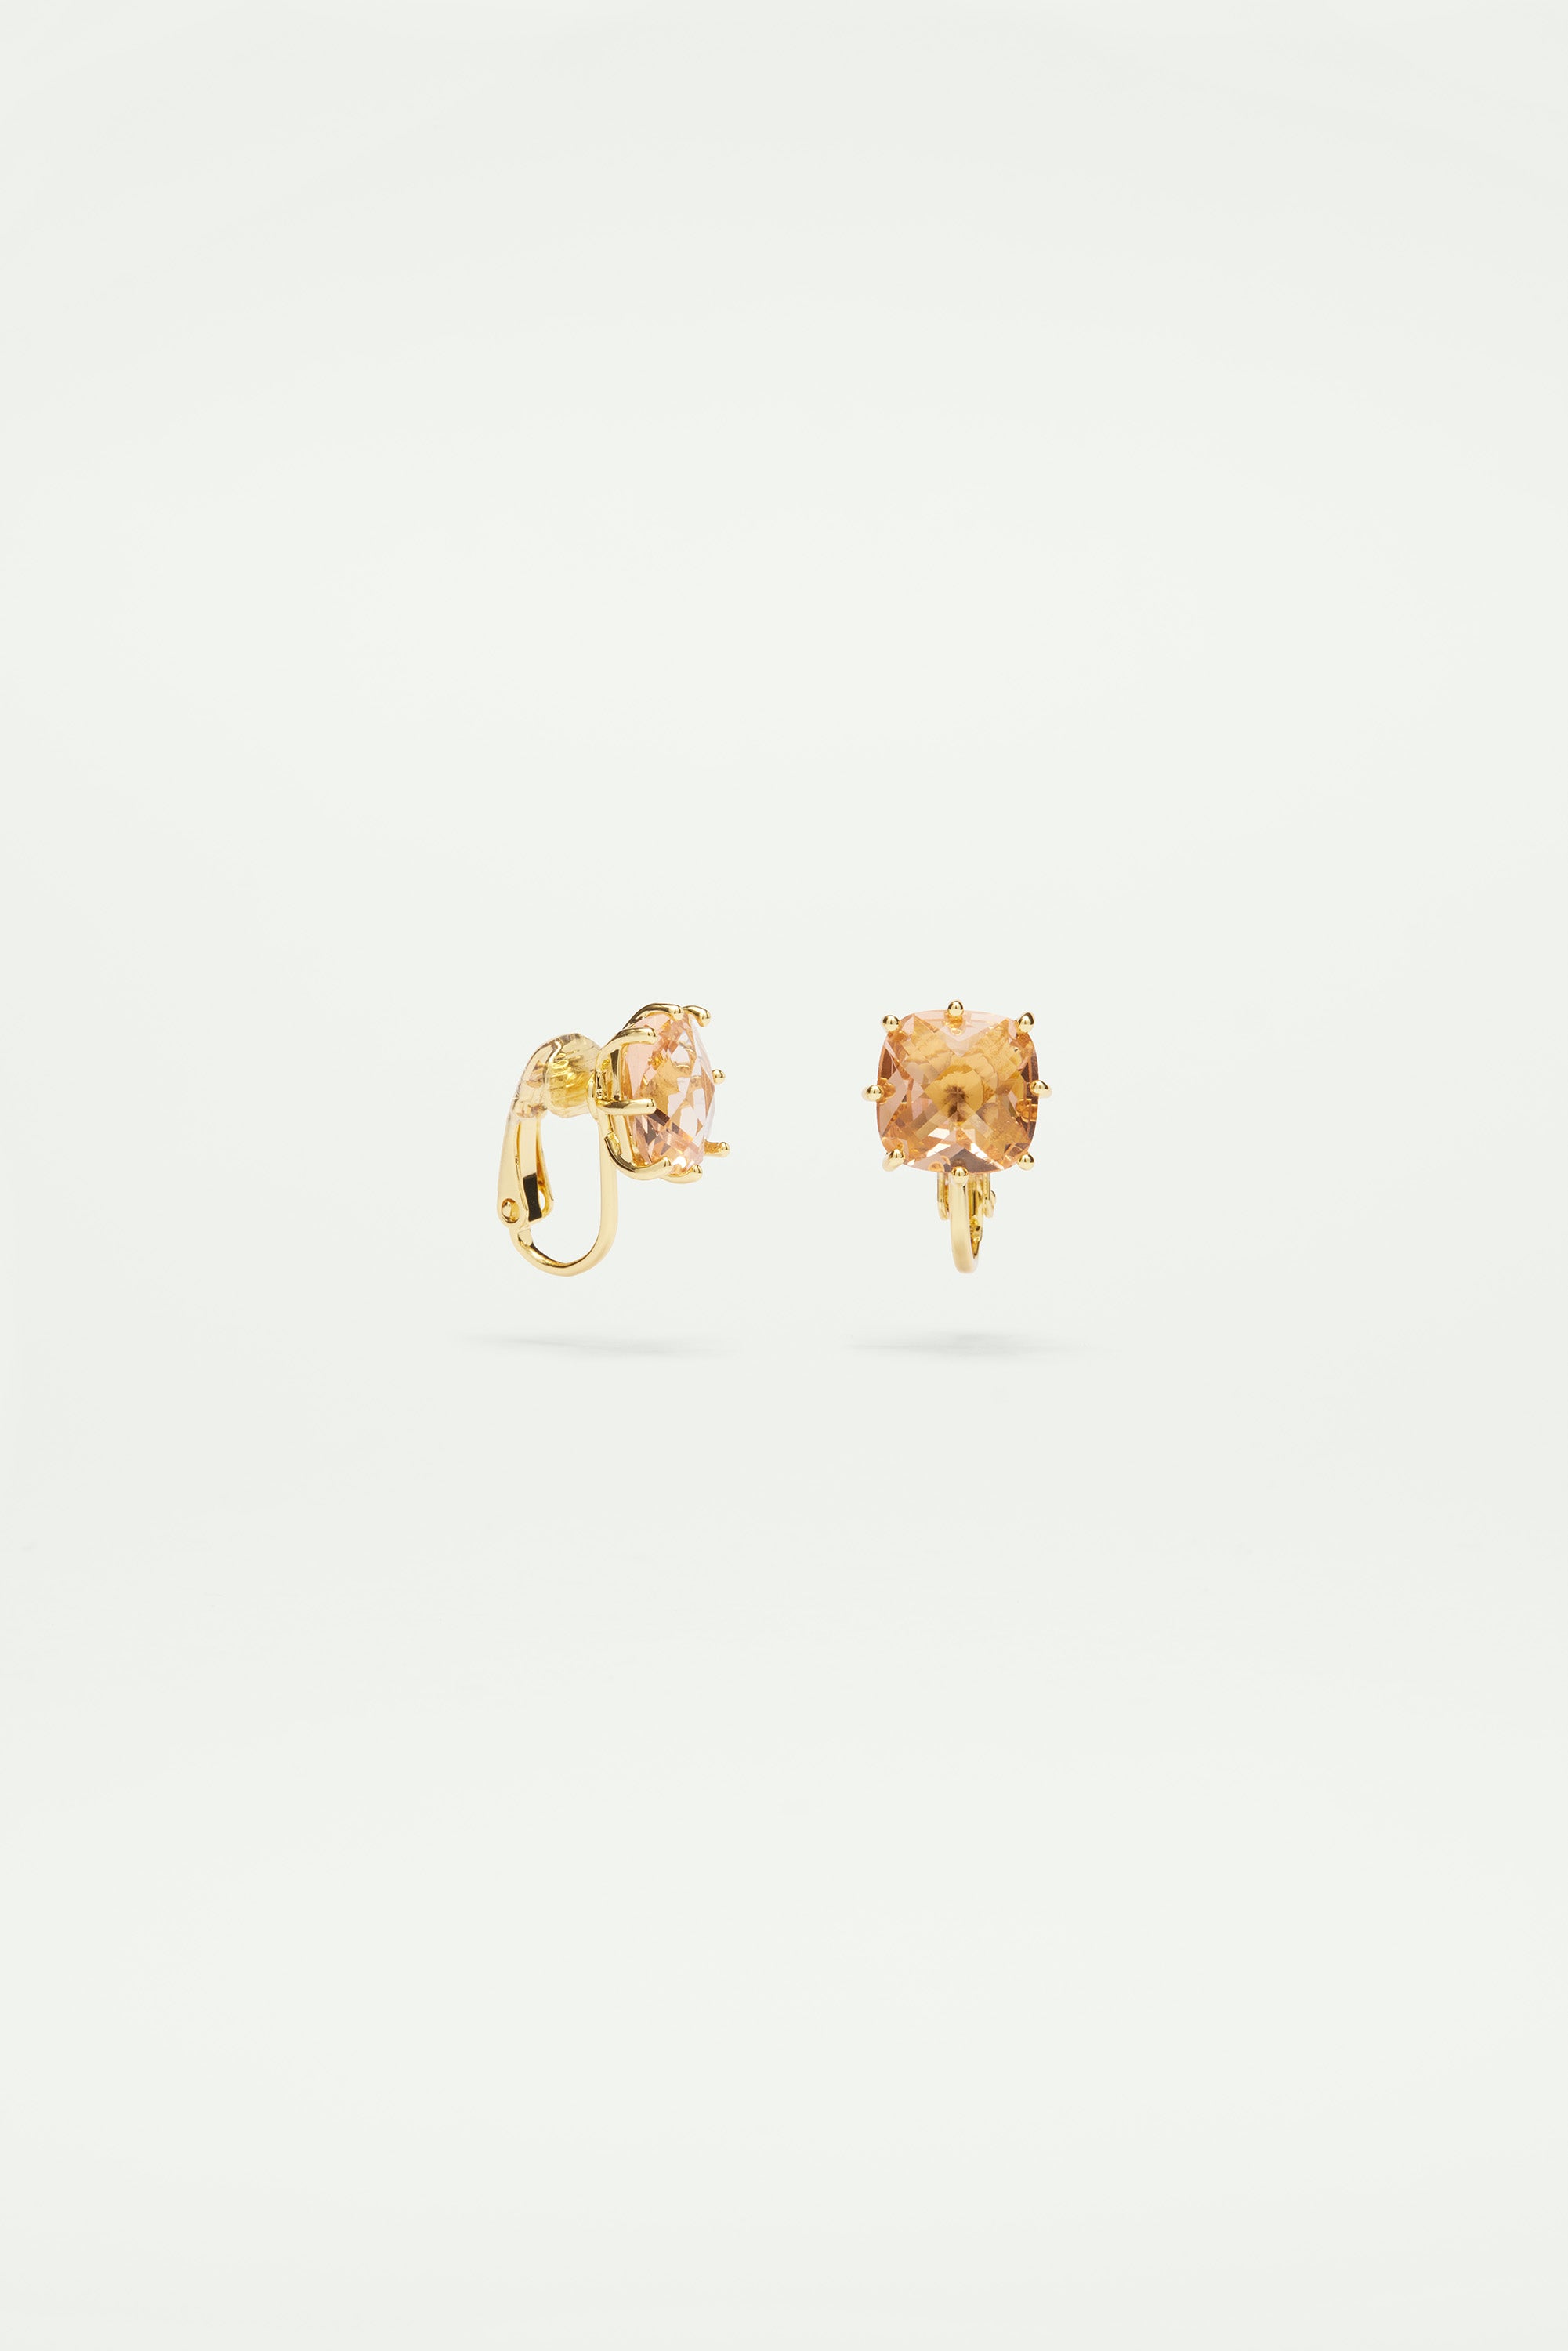 Apricot pink Diamantine square stone post earrings